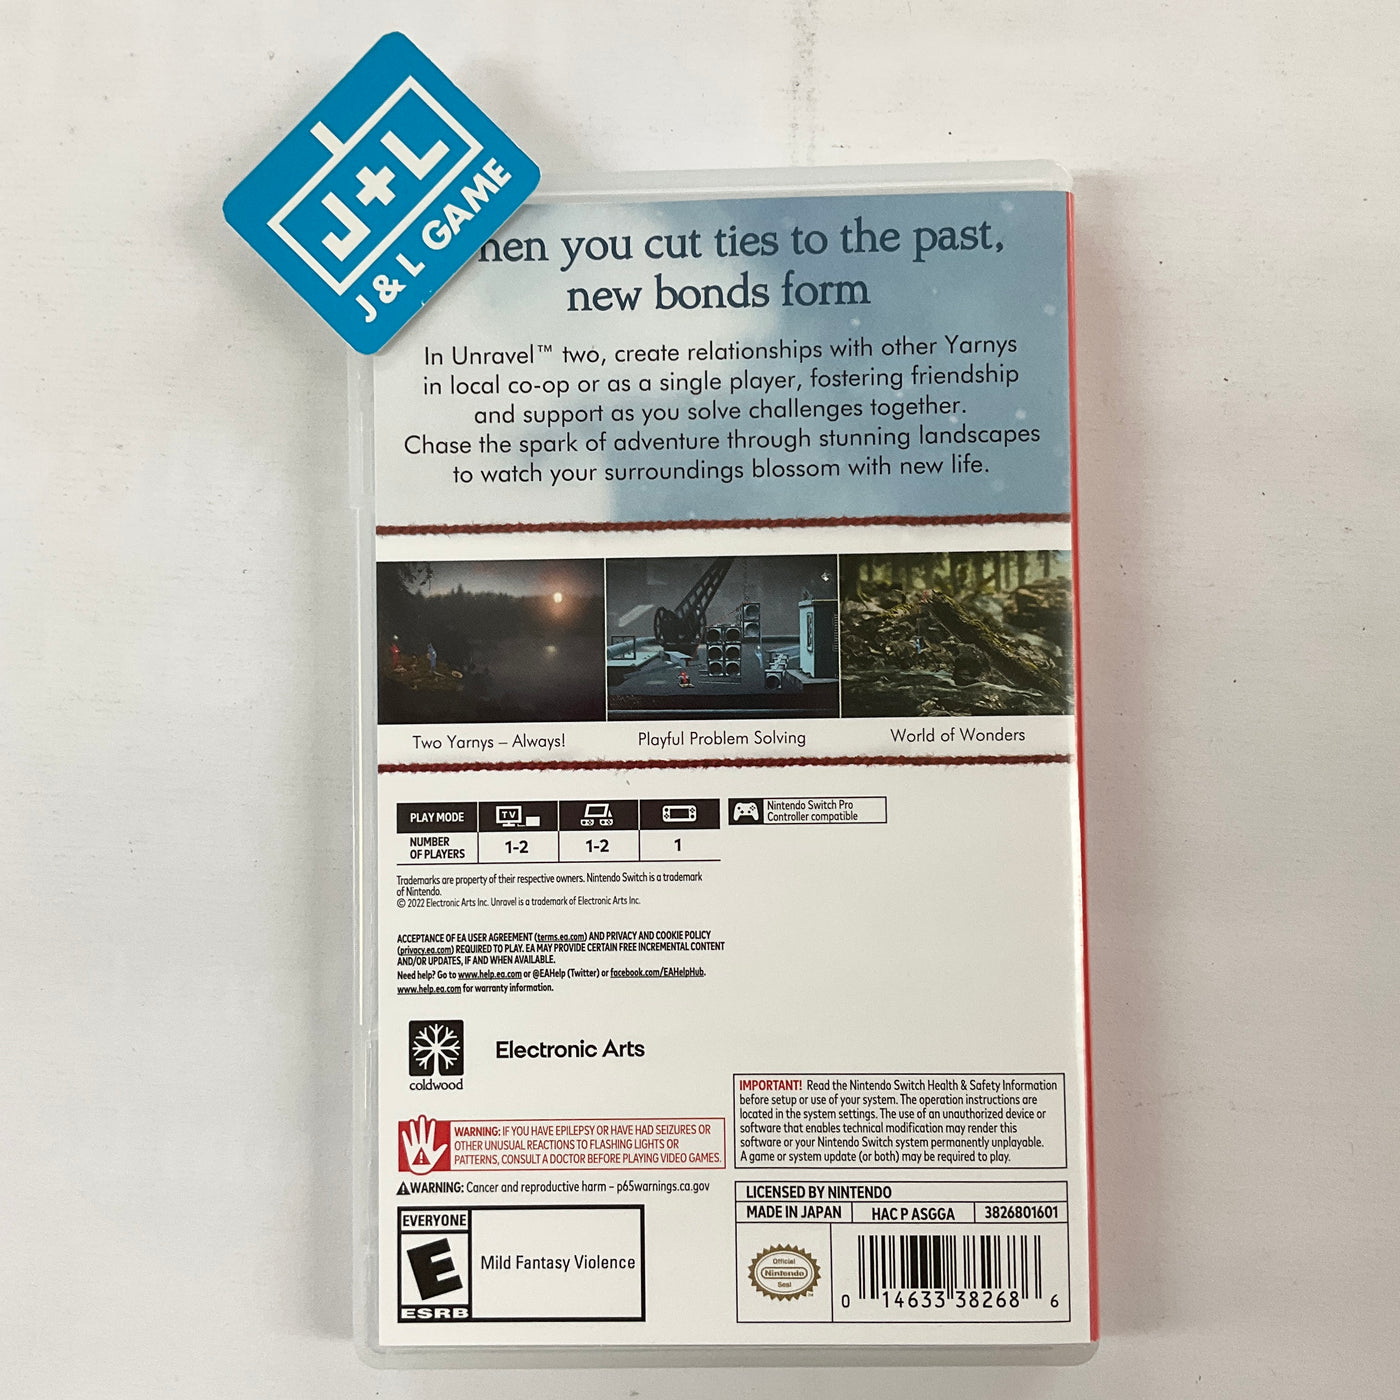 Unravel Two - | [Pre-Owned] Game Nintendo (NSW) Switch J&L